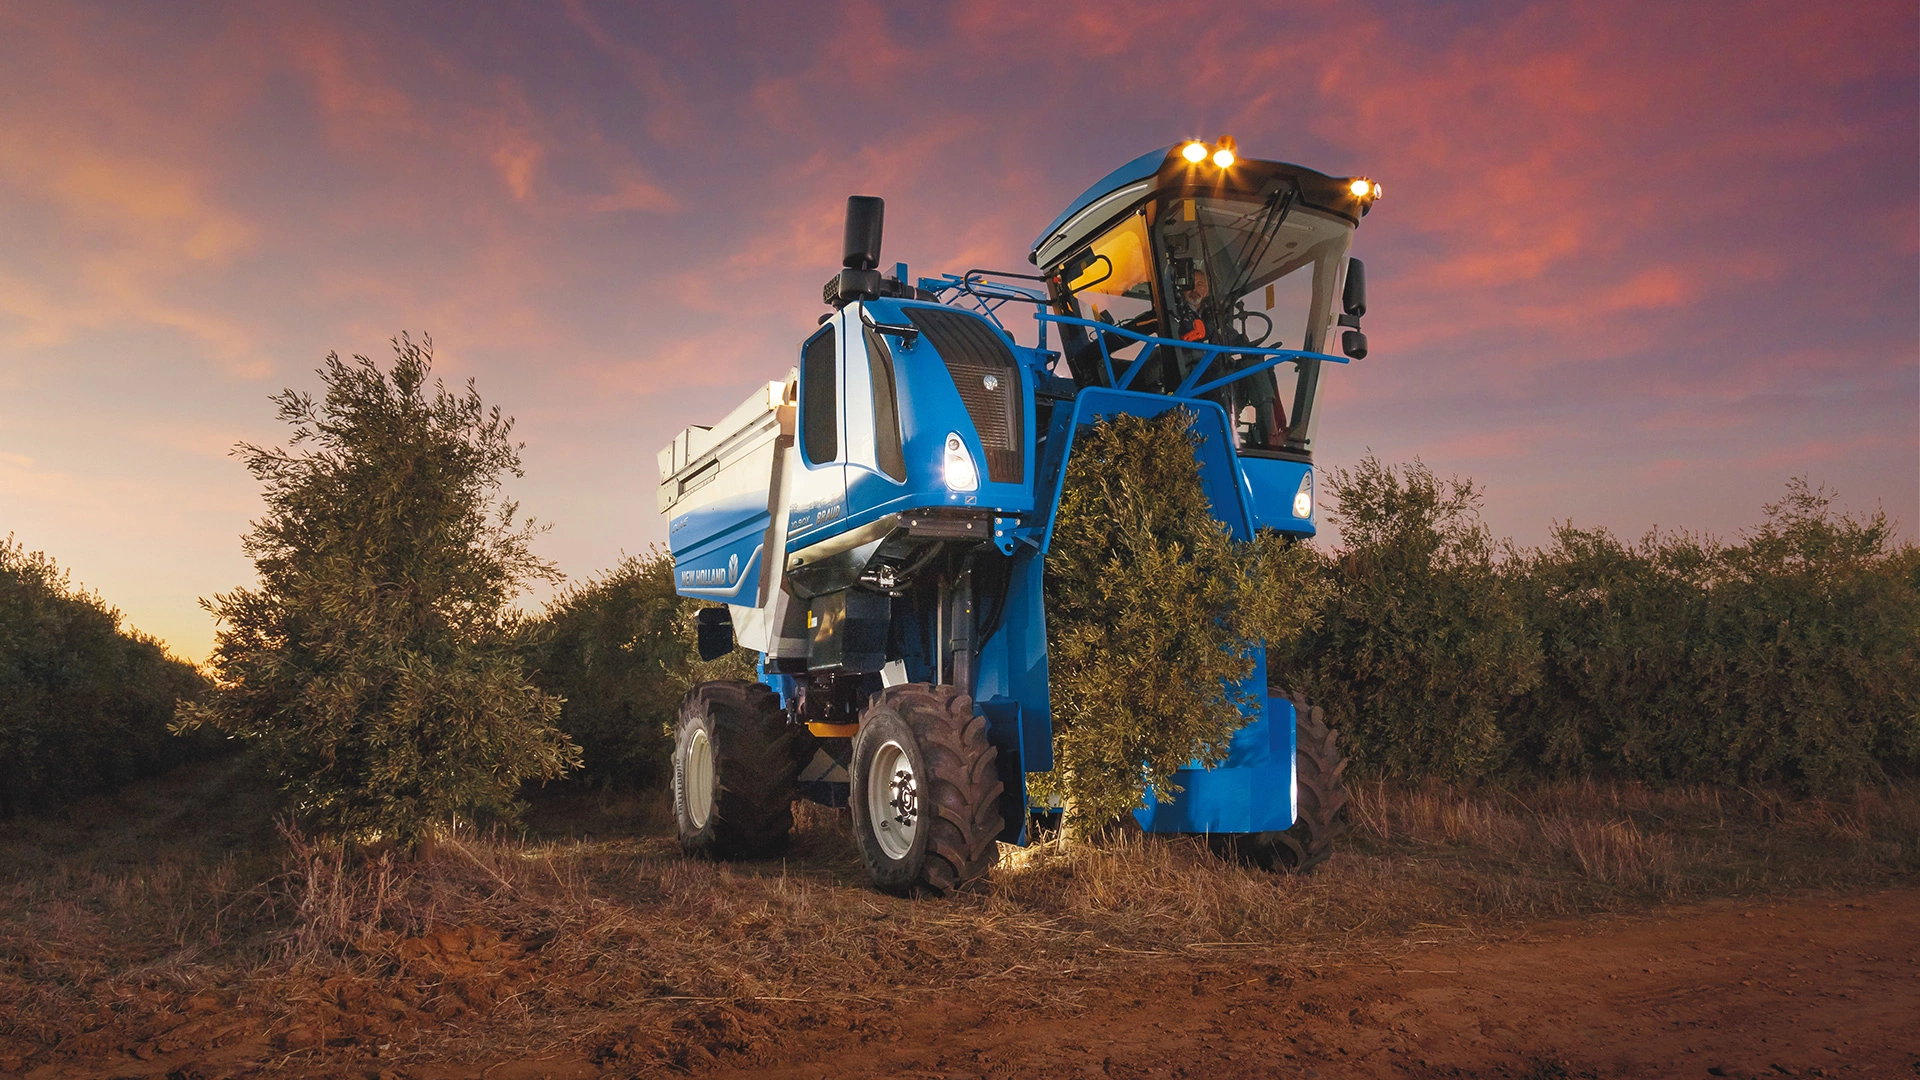 Braud 10.90X Olive Harvester working at Night